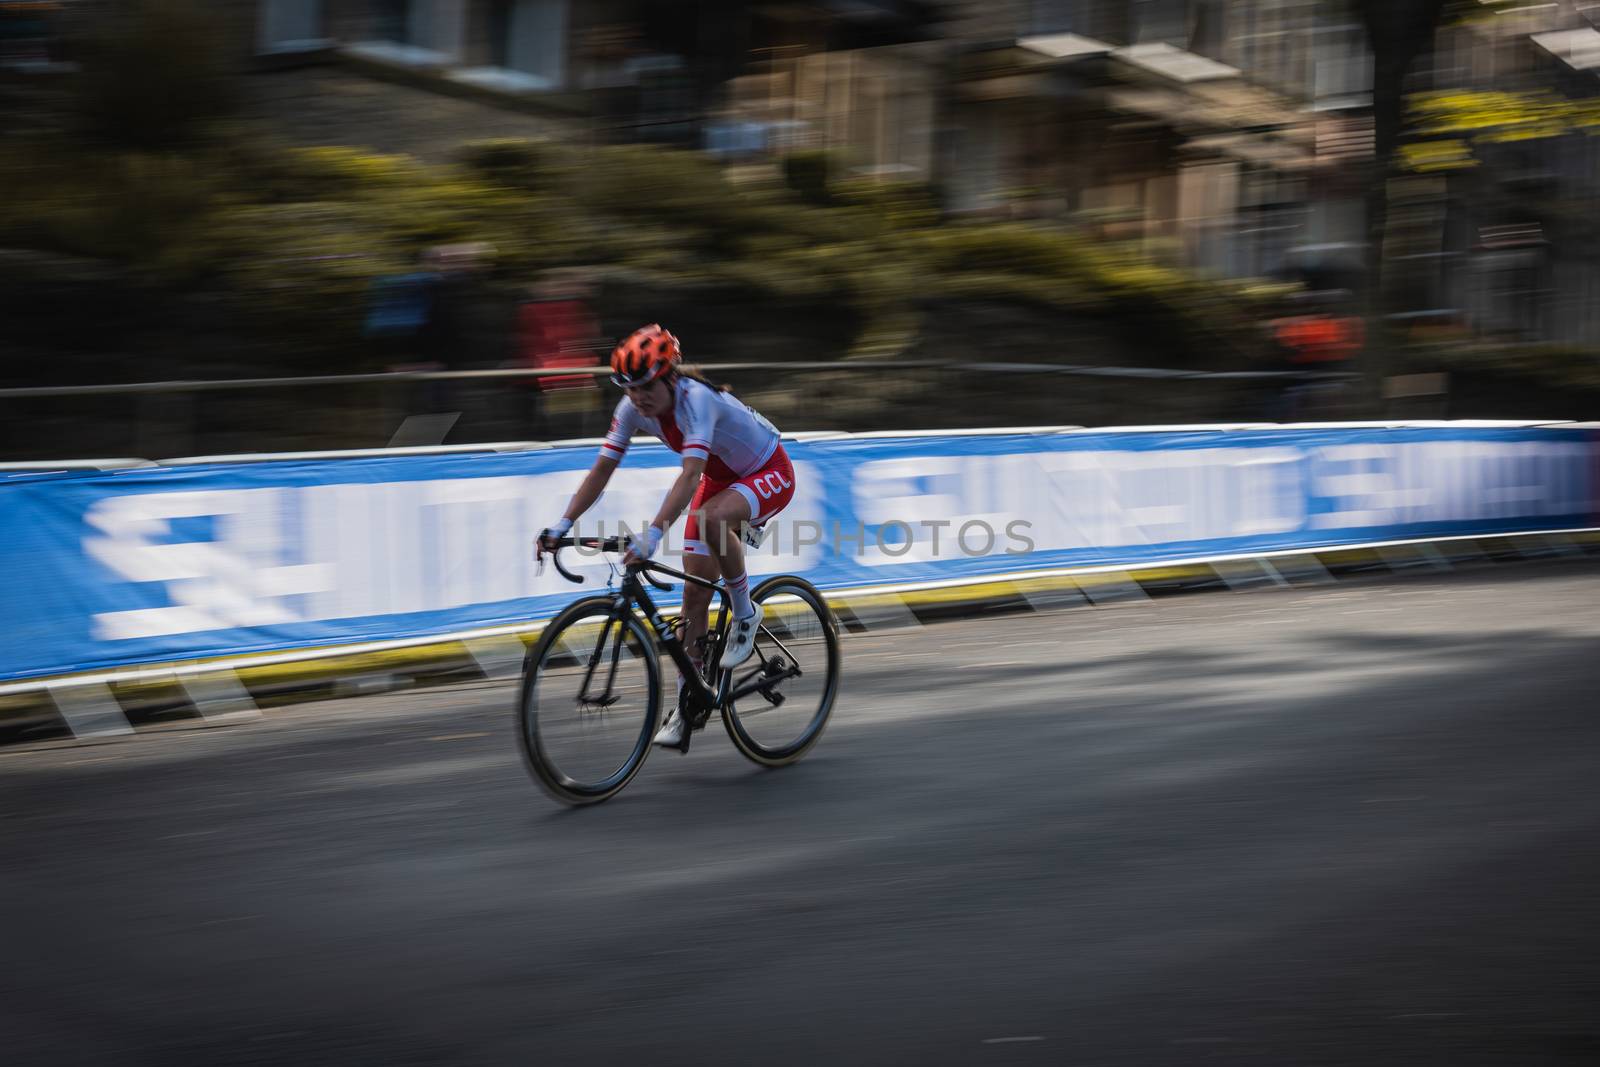 UCI Harrogate 2019 Cycling Event by samULvisuals